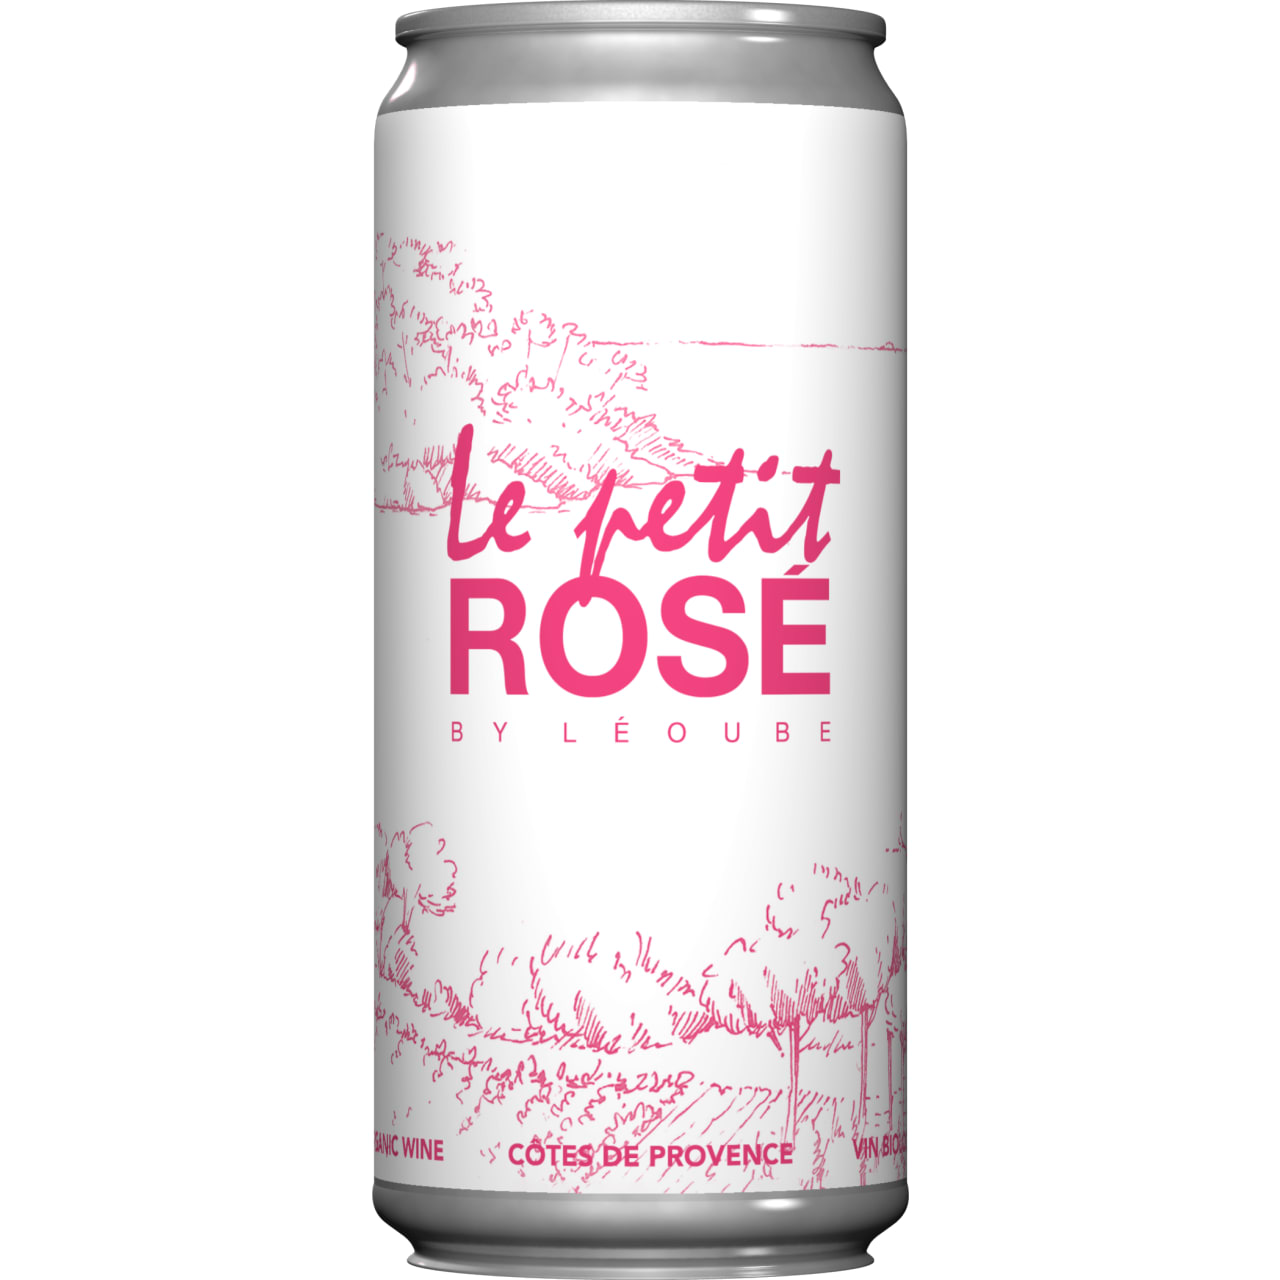 A pale, refreshing rosé with lively flavours of white peach and summer berries.